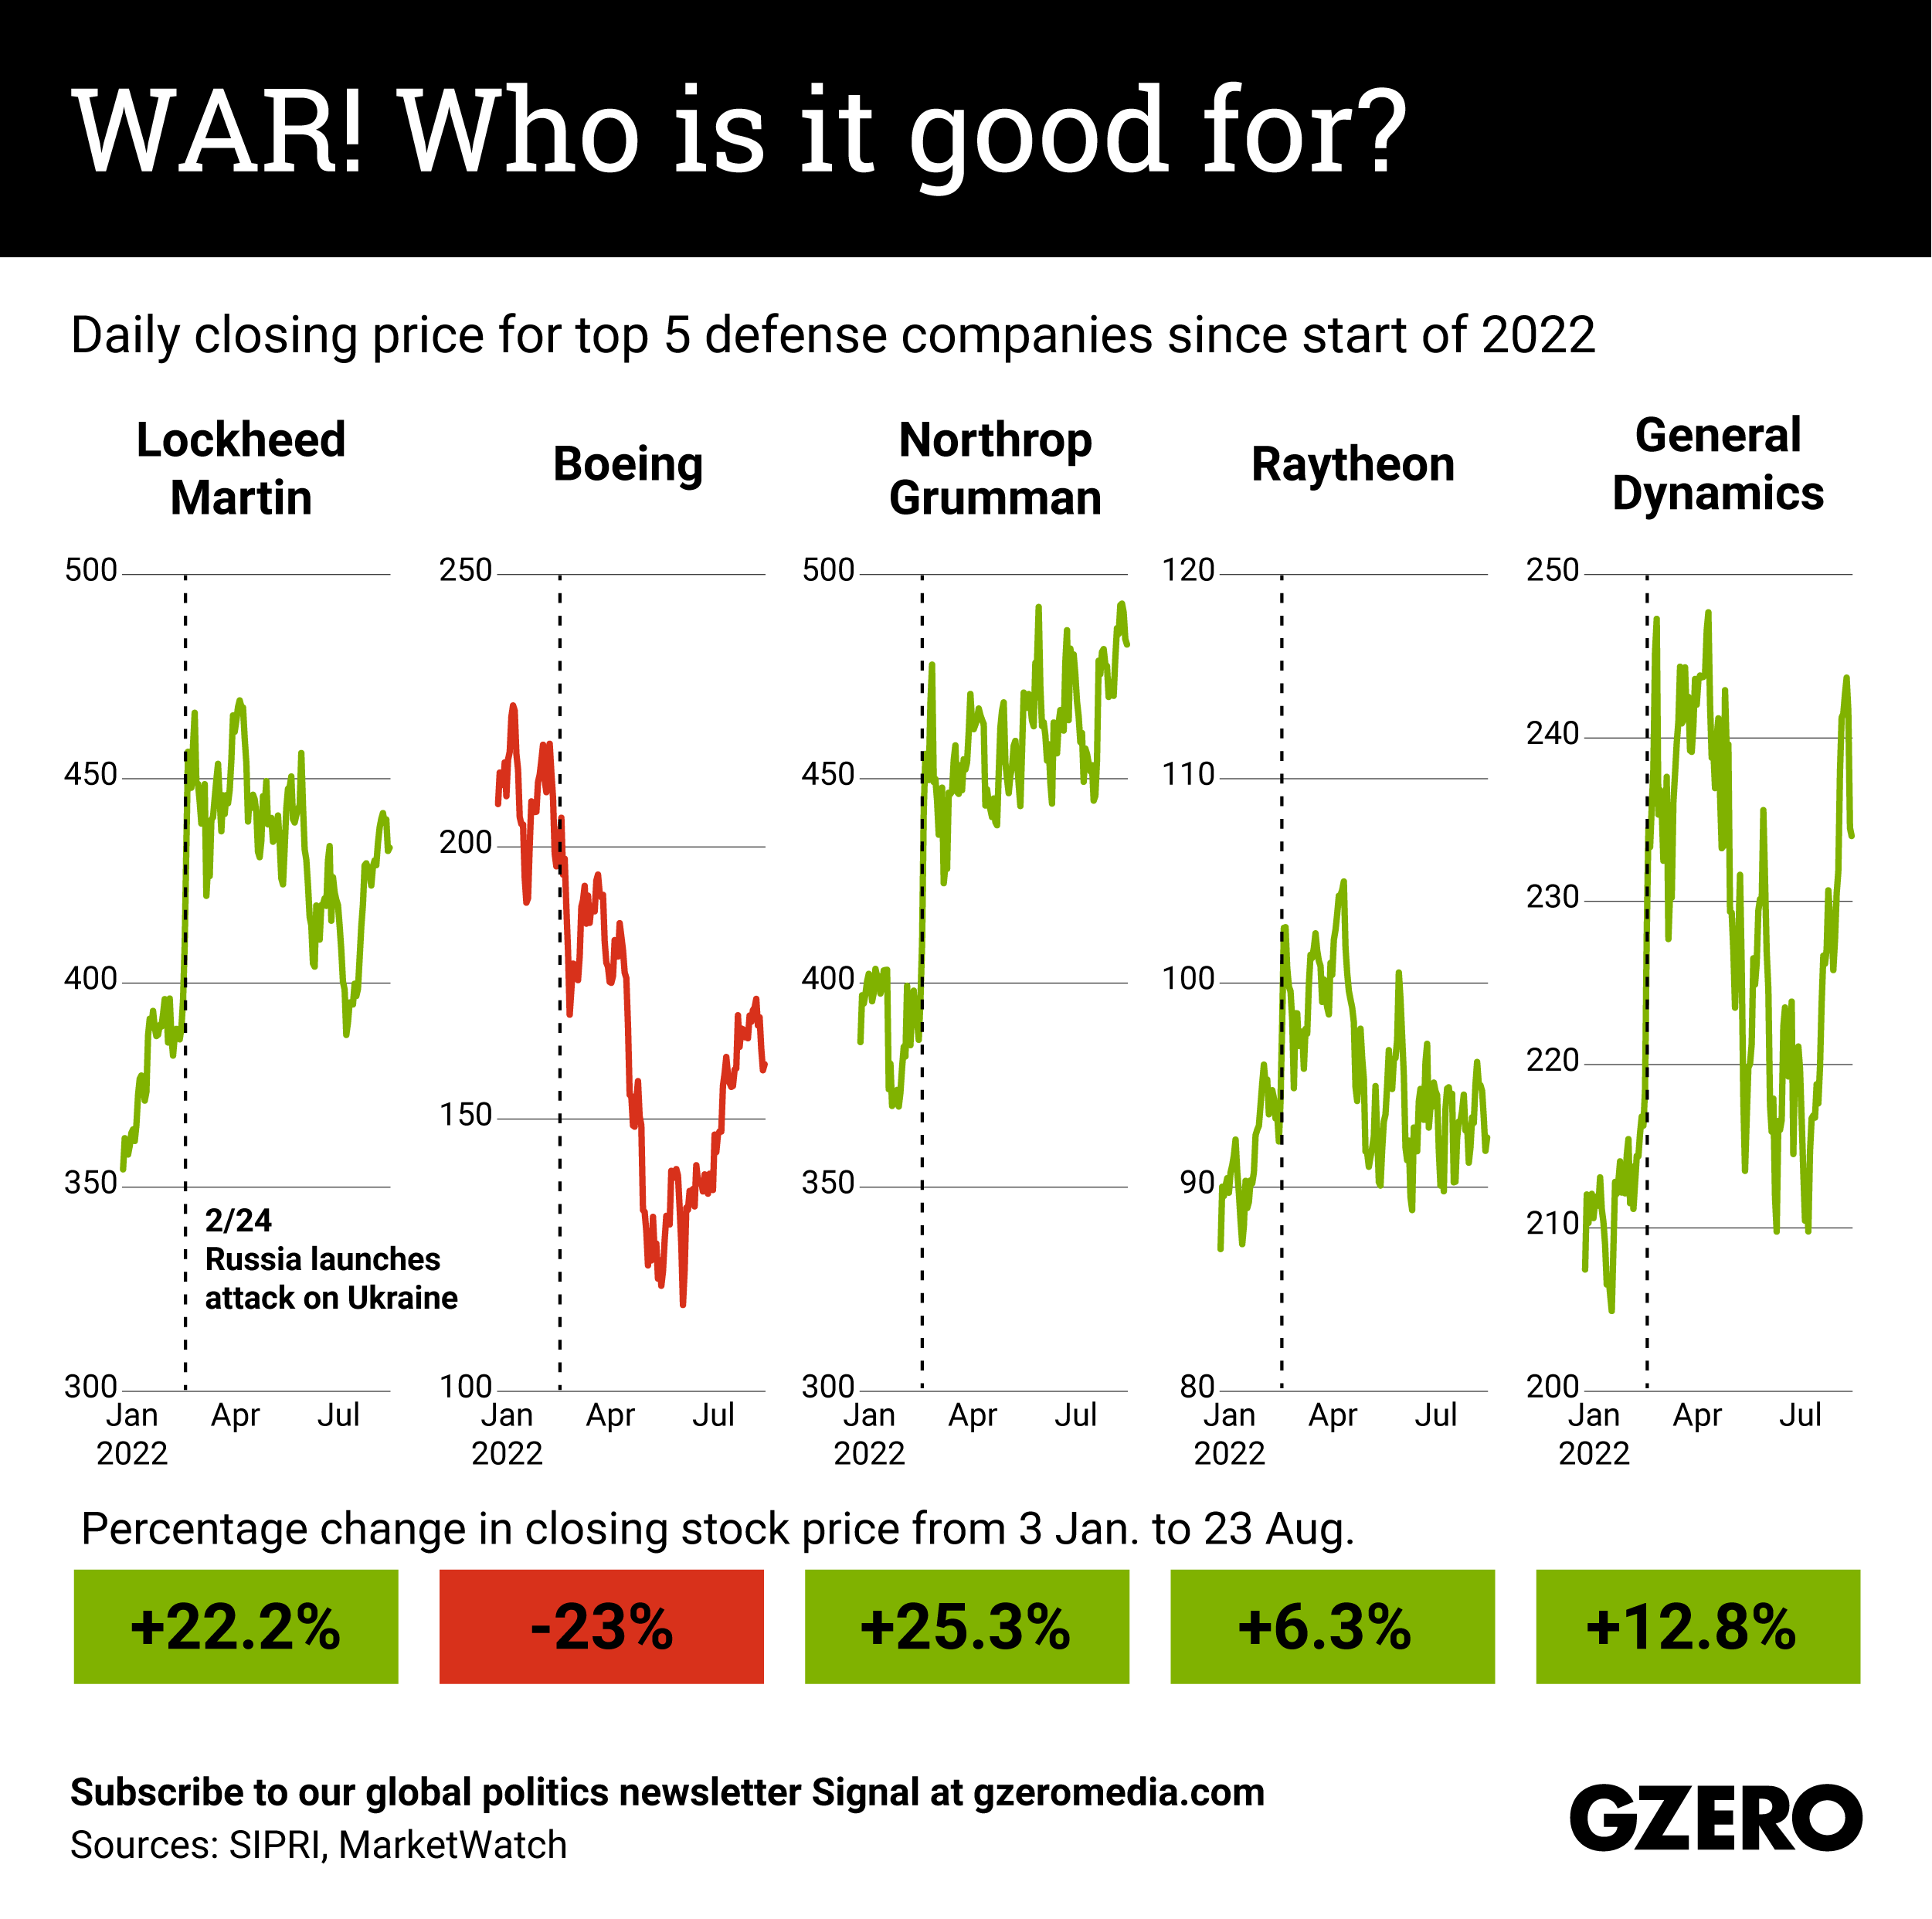 The Graphic Truth — WAR! Who is it good for?